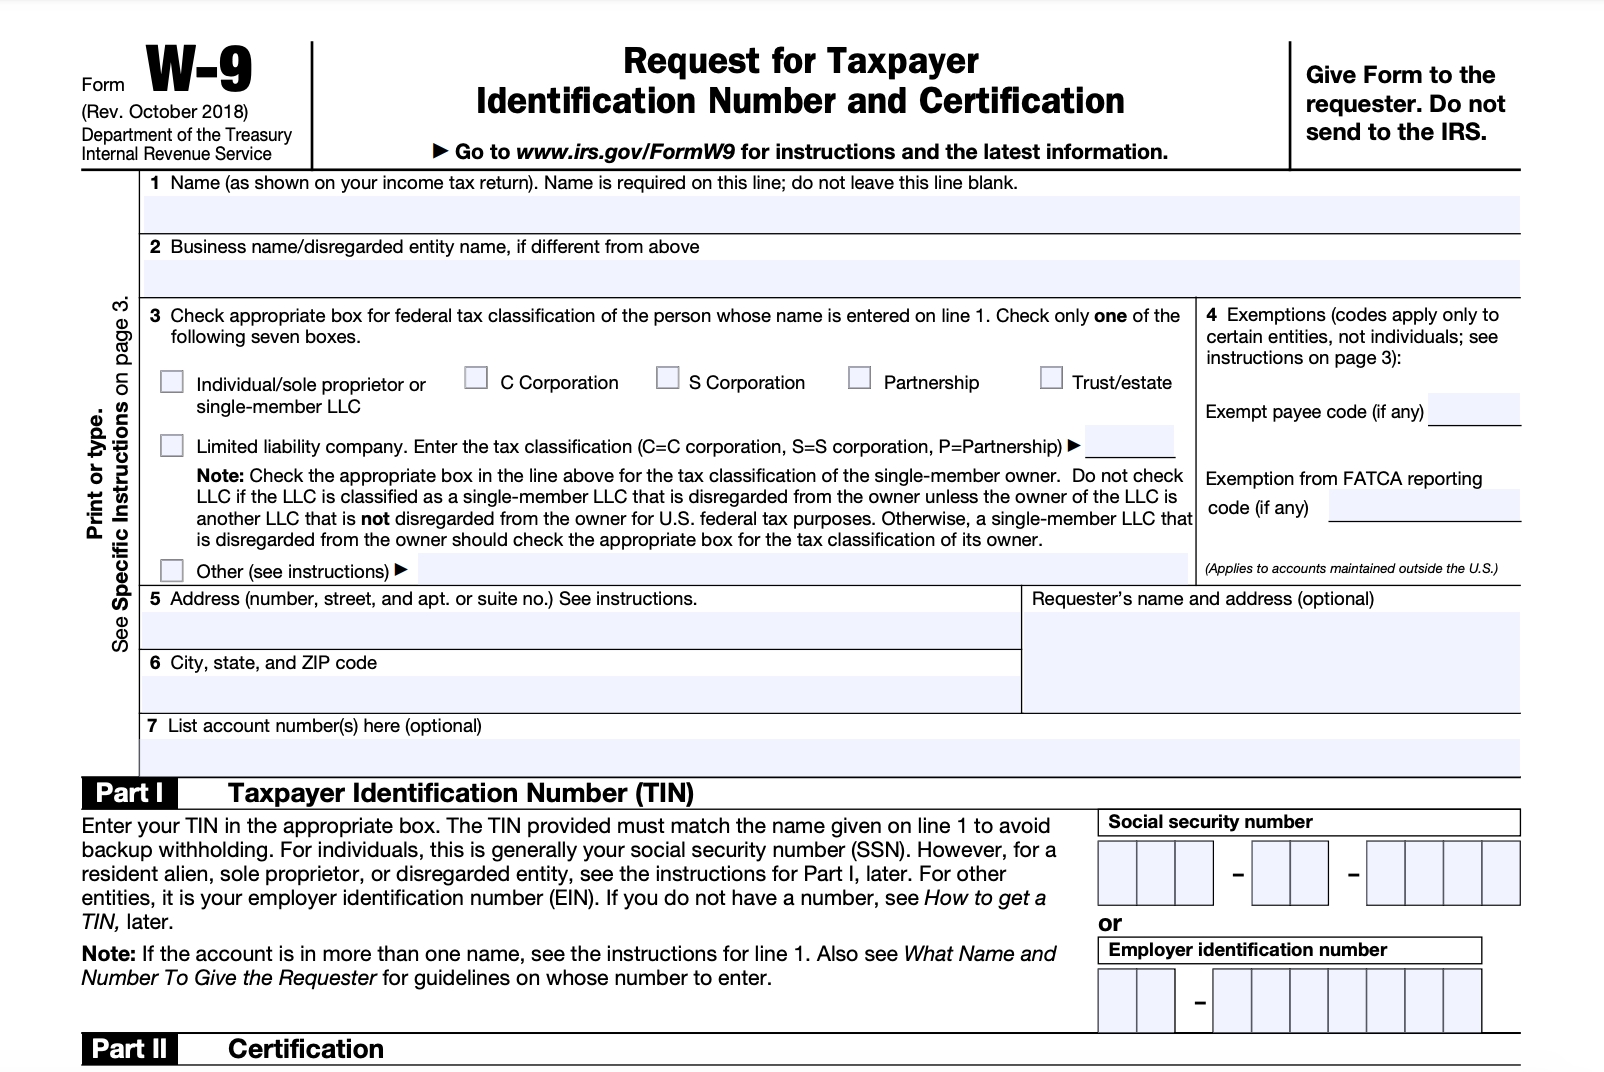 W-9 Form - Fill Out The Irs W-9 Form Online For 2019 | Smallpdf-2021 W-9 Form Printable Free